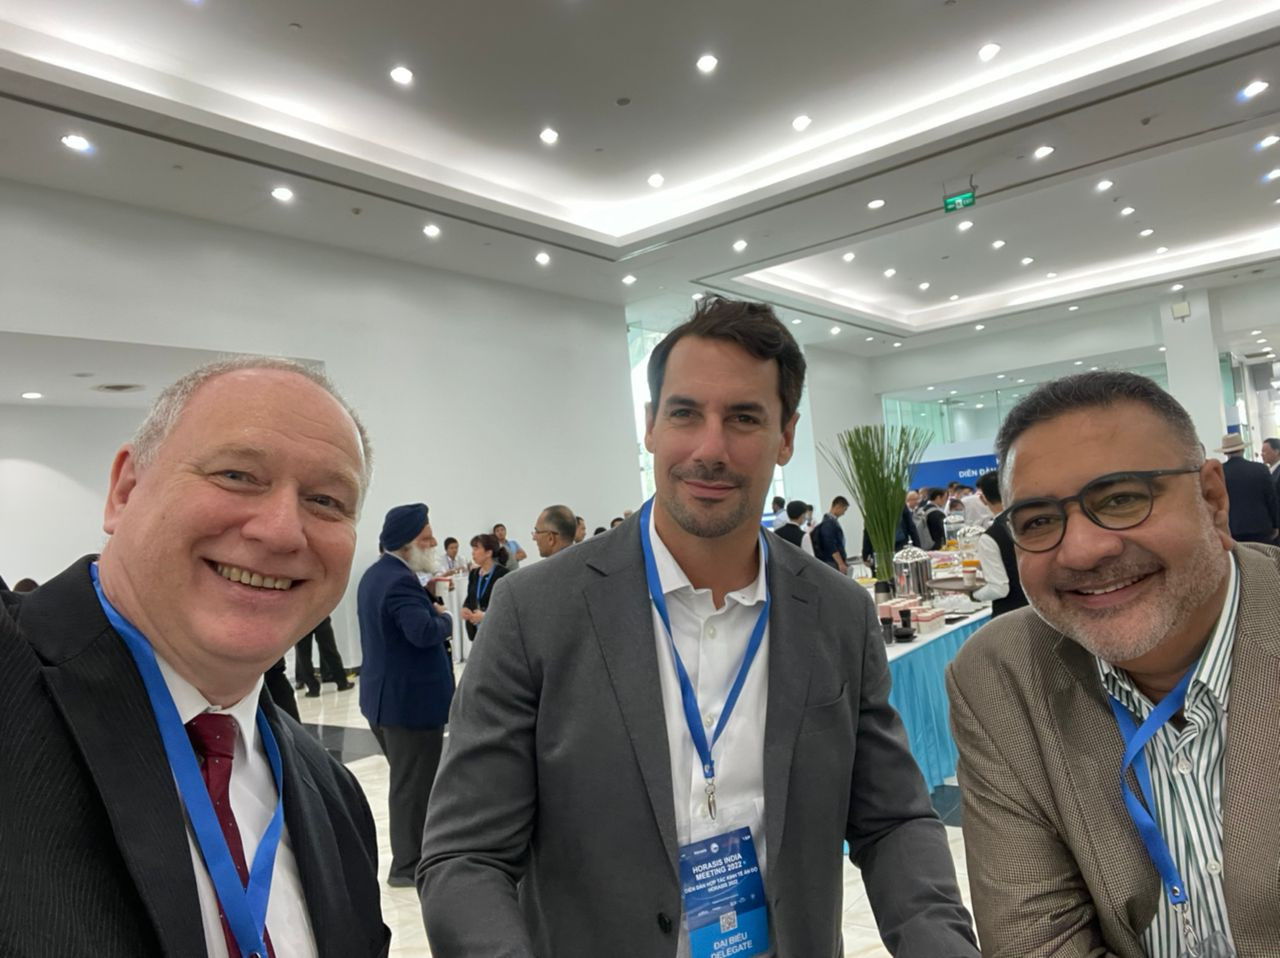 (From left) Chief executive of the Good Capitalism Forum, Professor Graham Kendall; PETRA Lifestyle chief executive Roberto Guiati, and PETRA group chairman Datuk (Dr) Vinod Sekhar at the sidelines of the Horasis India Meeting in Binh Duong New City, Vietnam. – The Vibes pic, September 25, 2022